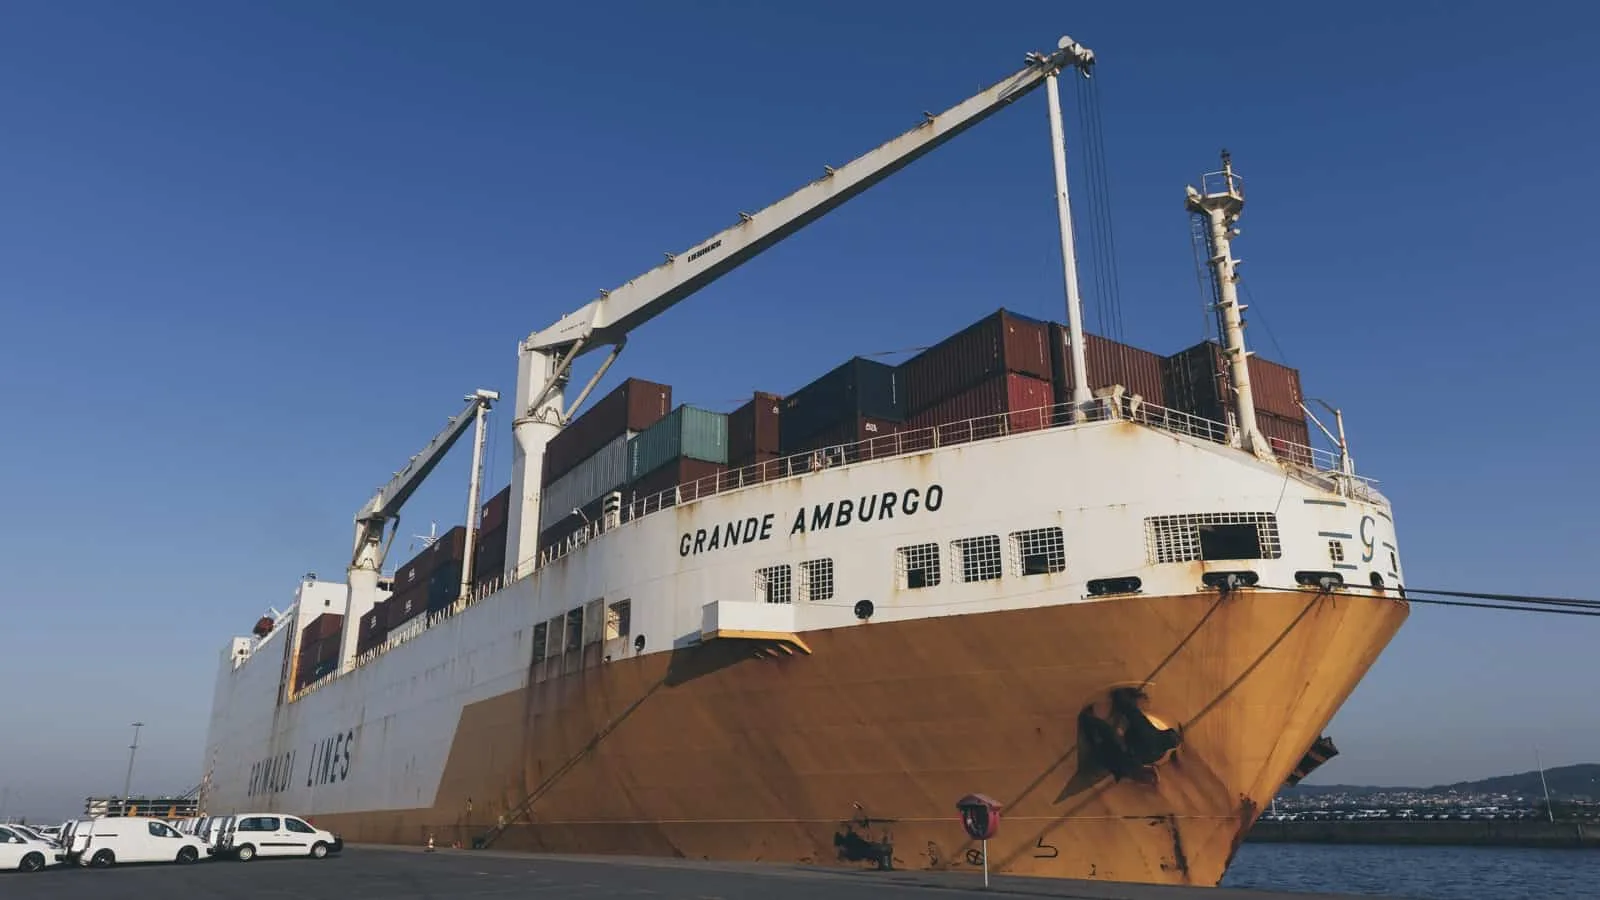 Cargo ship travel is a unique way to hop across continents but what's it like to spend a month or more at sea on a freight ship? We've just sailed from Europe to Uruguay with our camper van and you can check out our time at sea here.